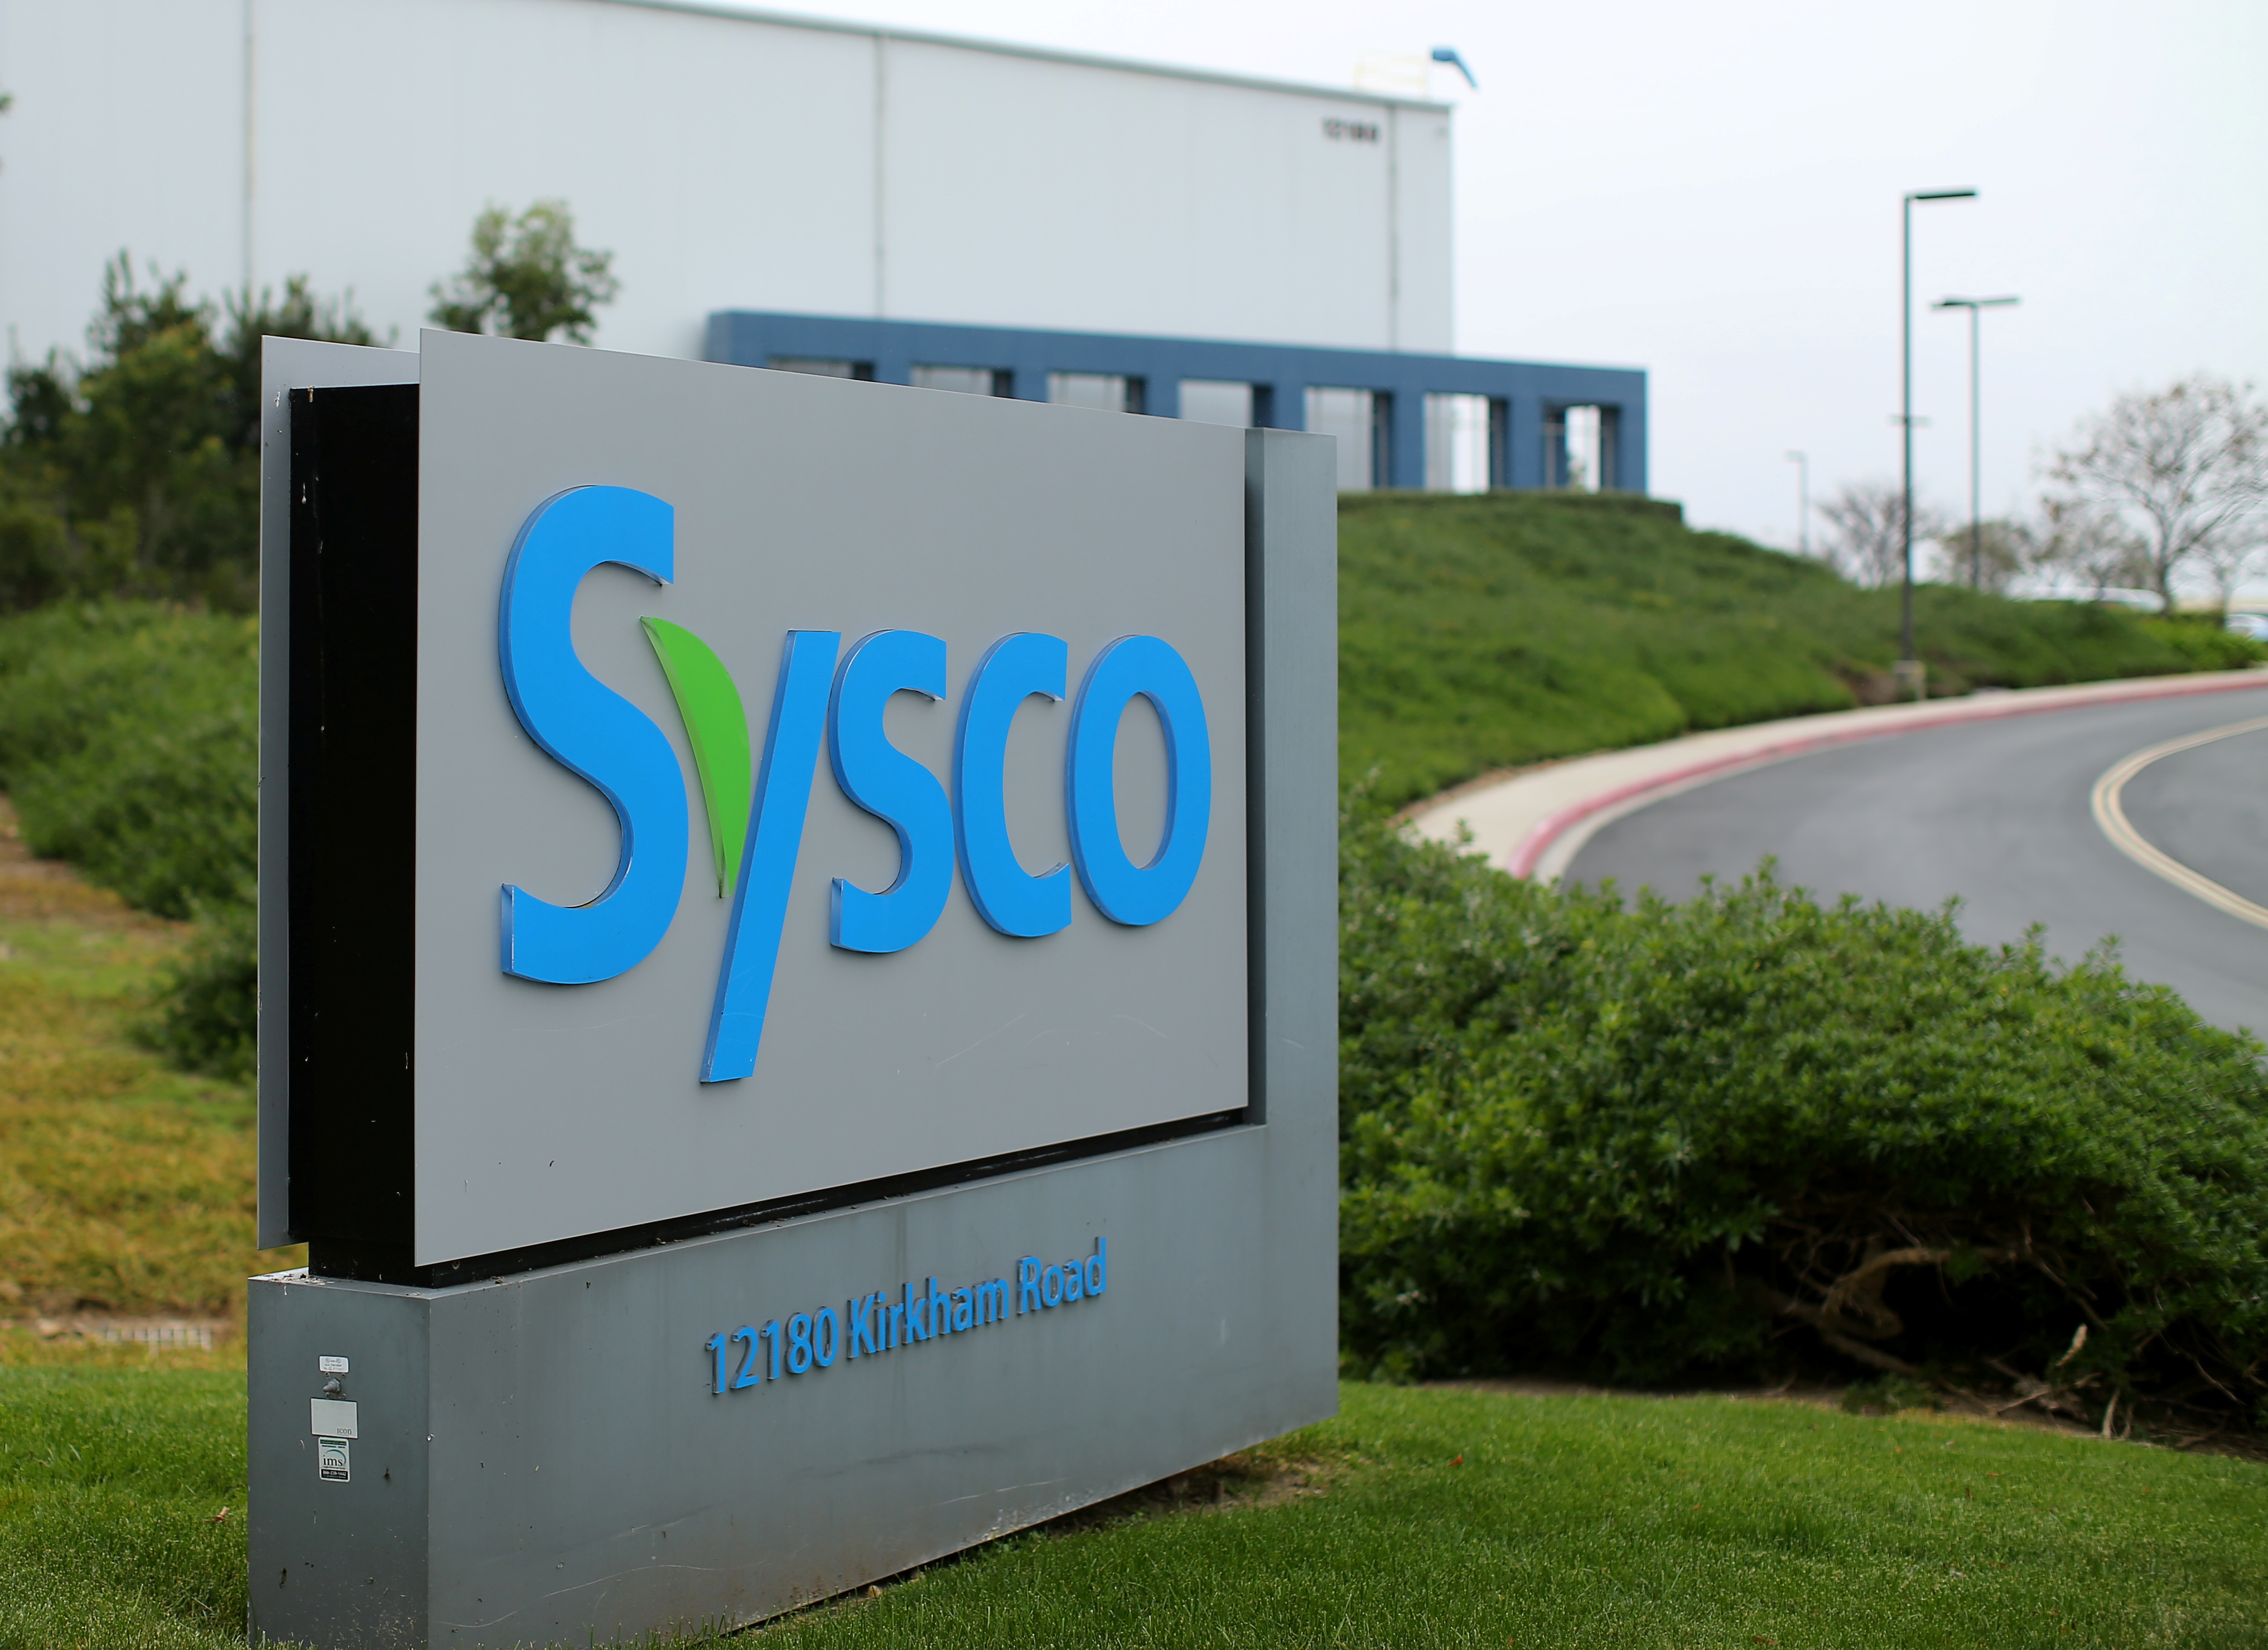 A Sysco sign is shown outside one of their distribution centers in Poway, California